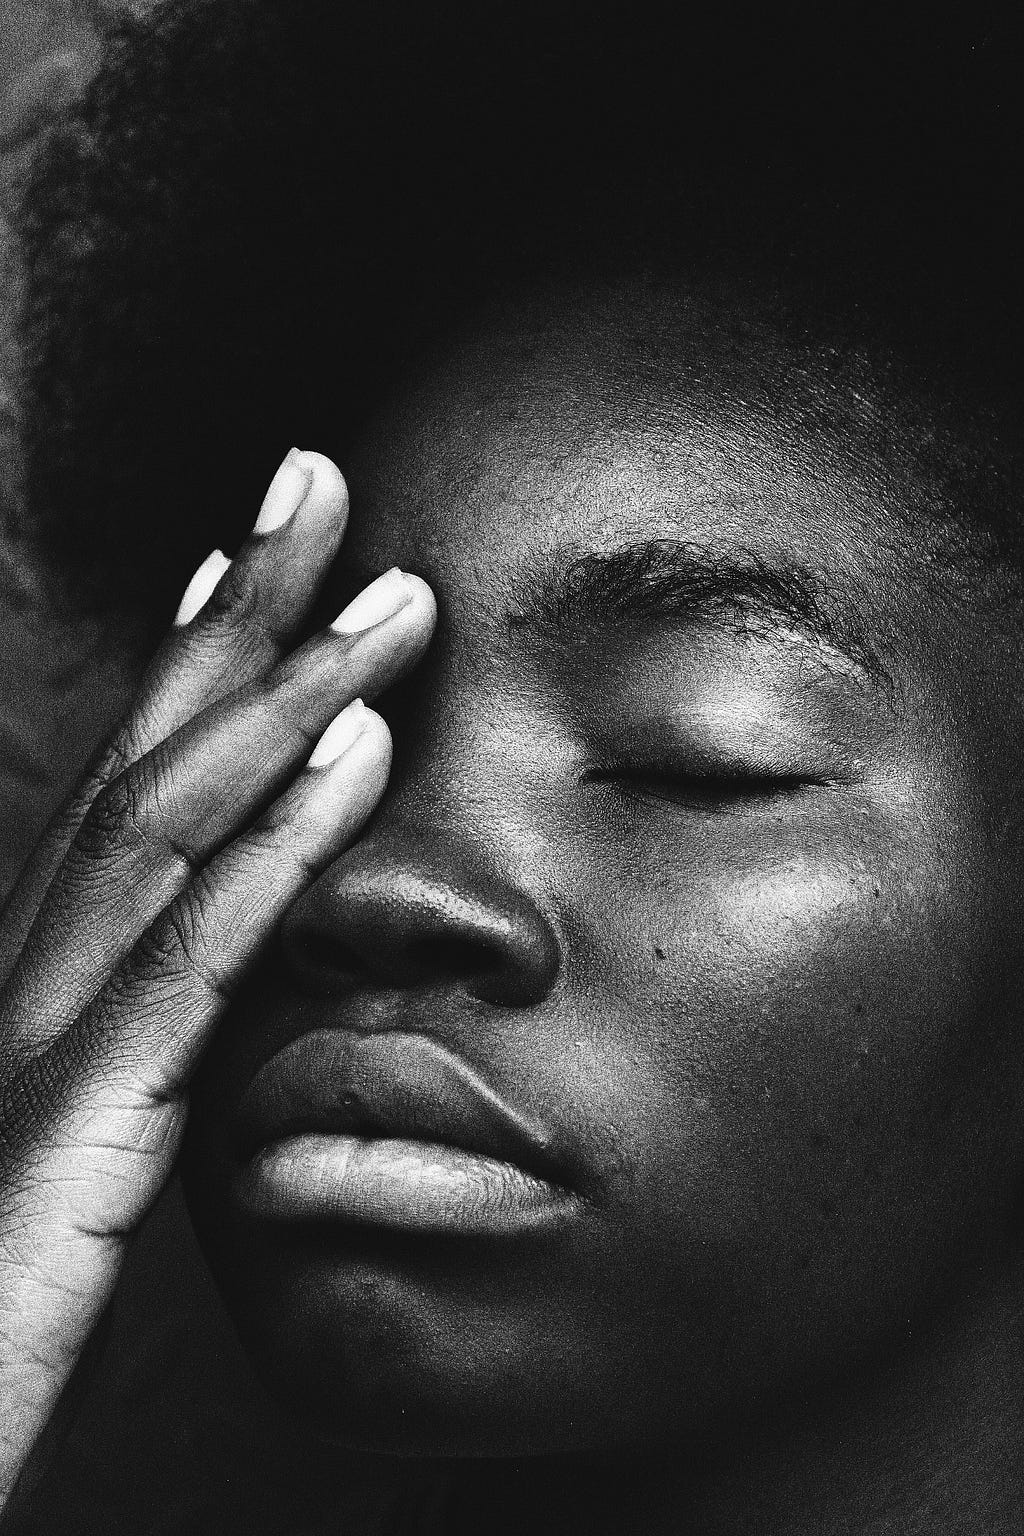 Black women tired with her face in her hands